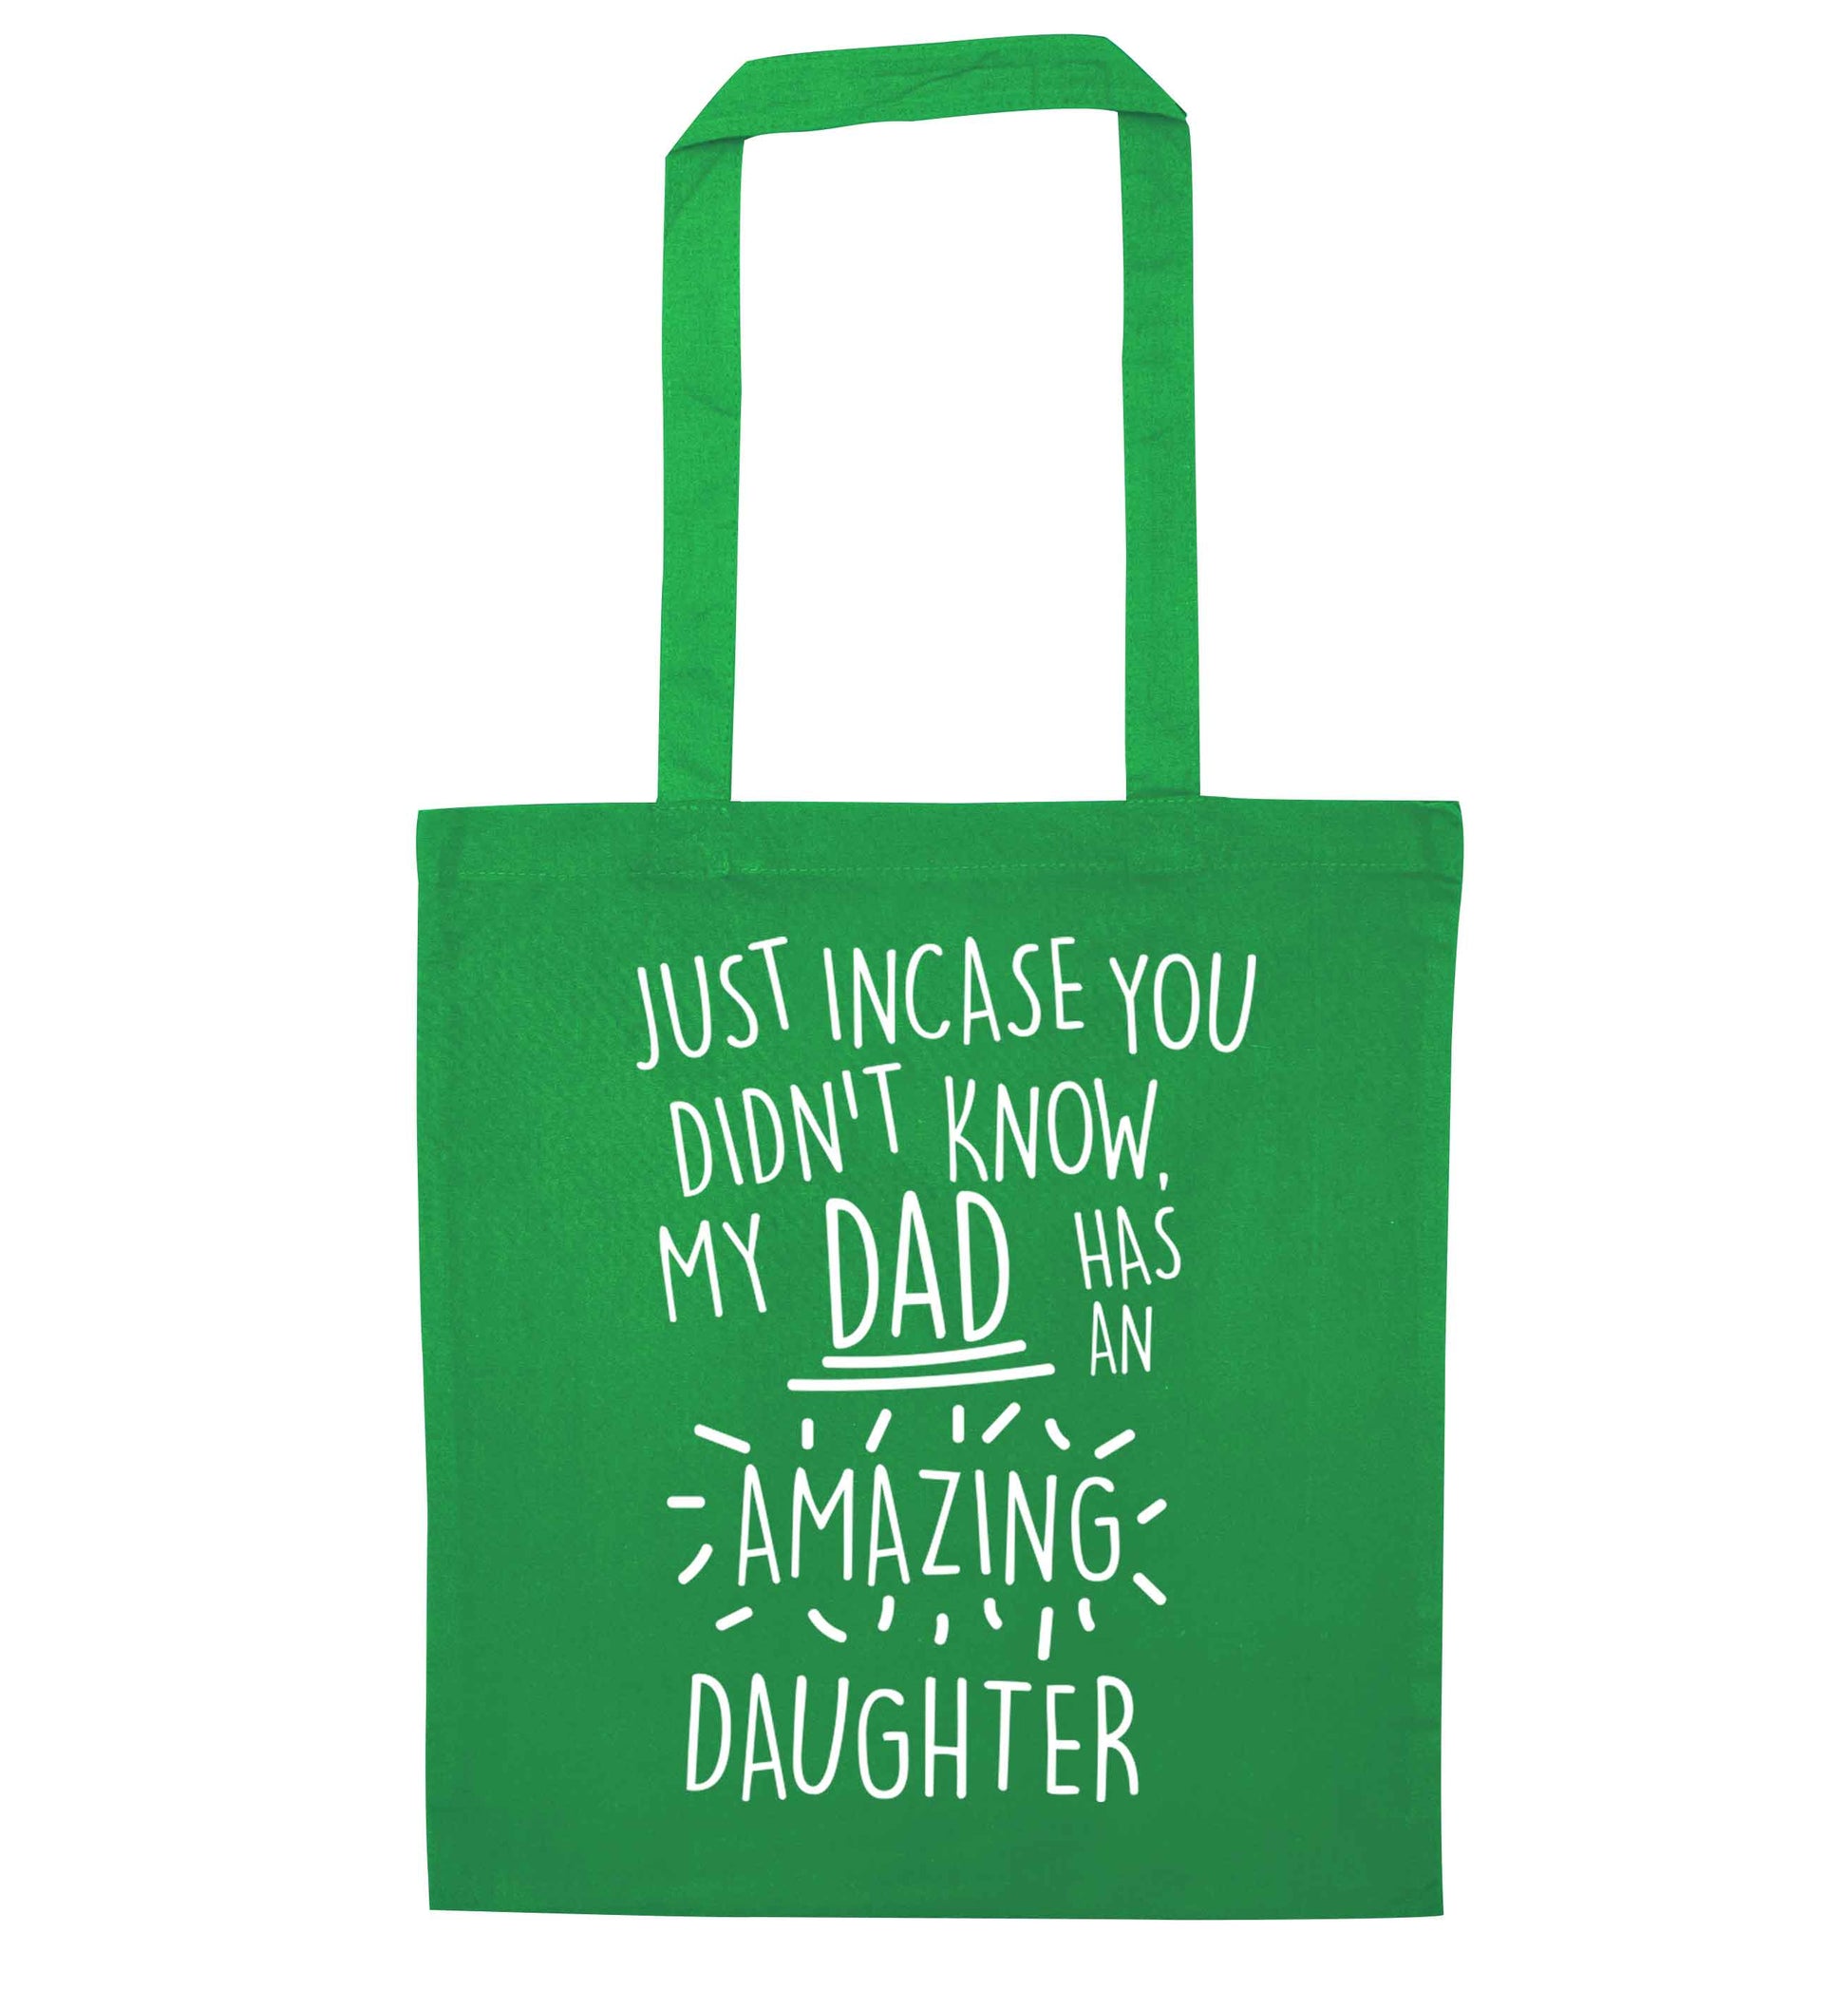 Just incase you didn't know my dad has an amazing daughter green tote bag